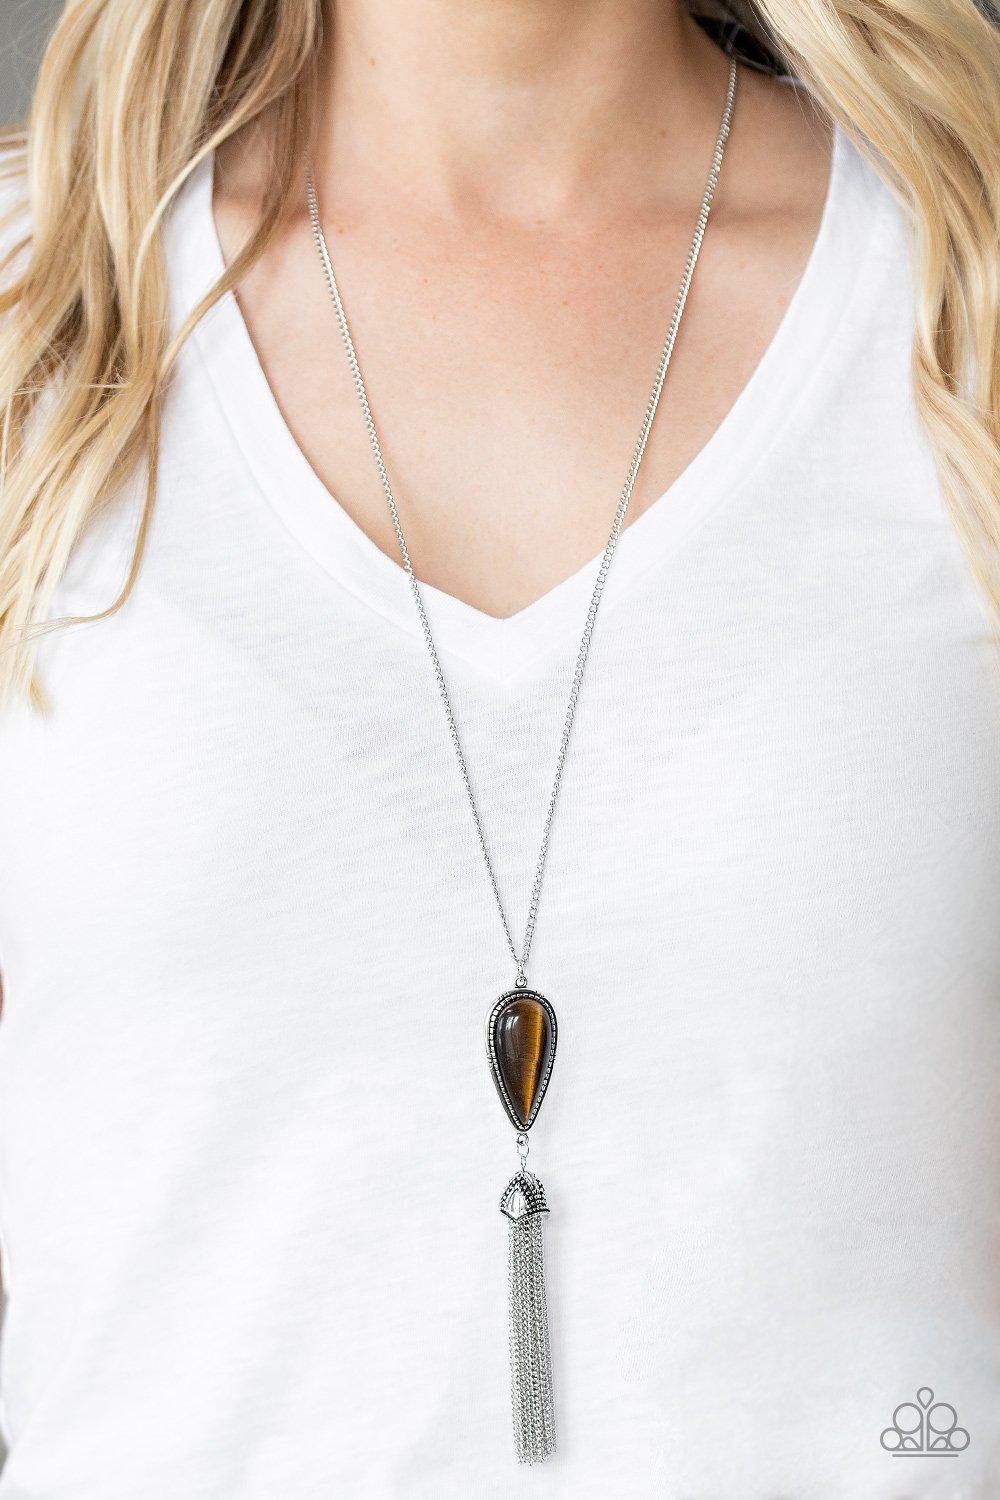 Zen Generation Brown Tiger's Eye Tassel Necklace - Paparazzi Accessories-CarasShop.com - $5 Jewelry by Cara Jewels